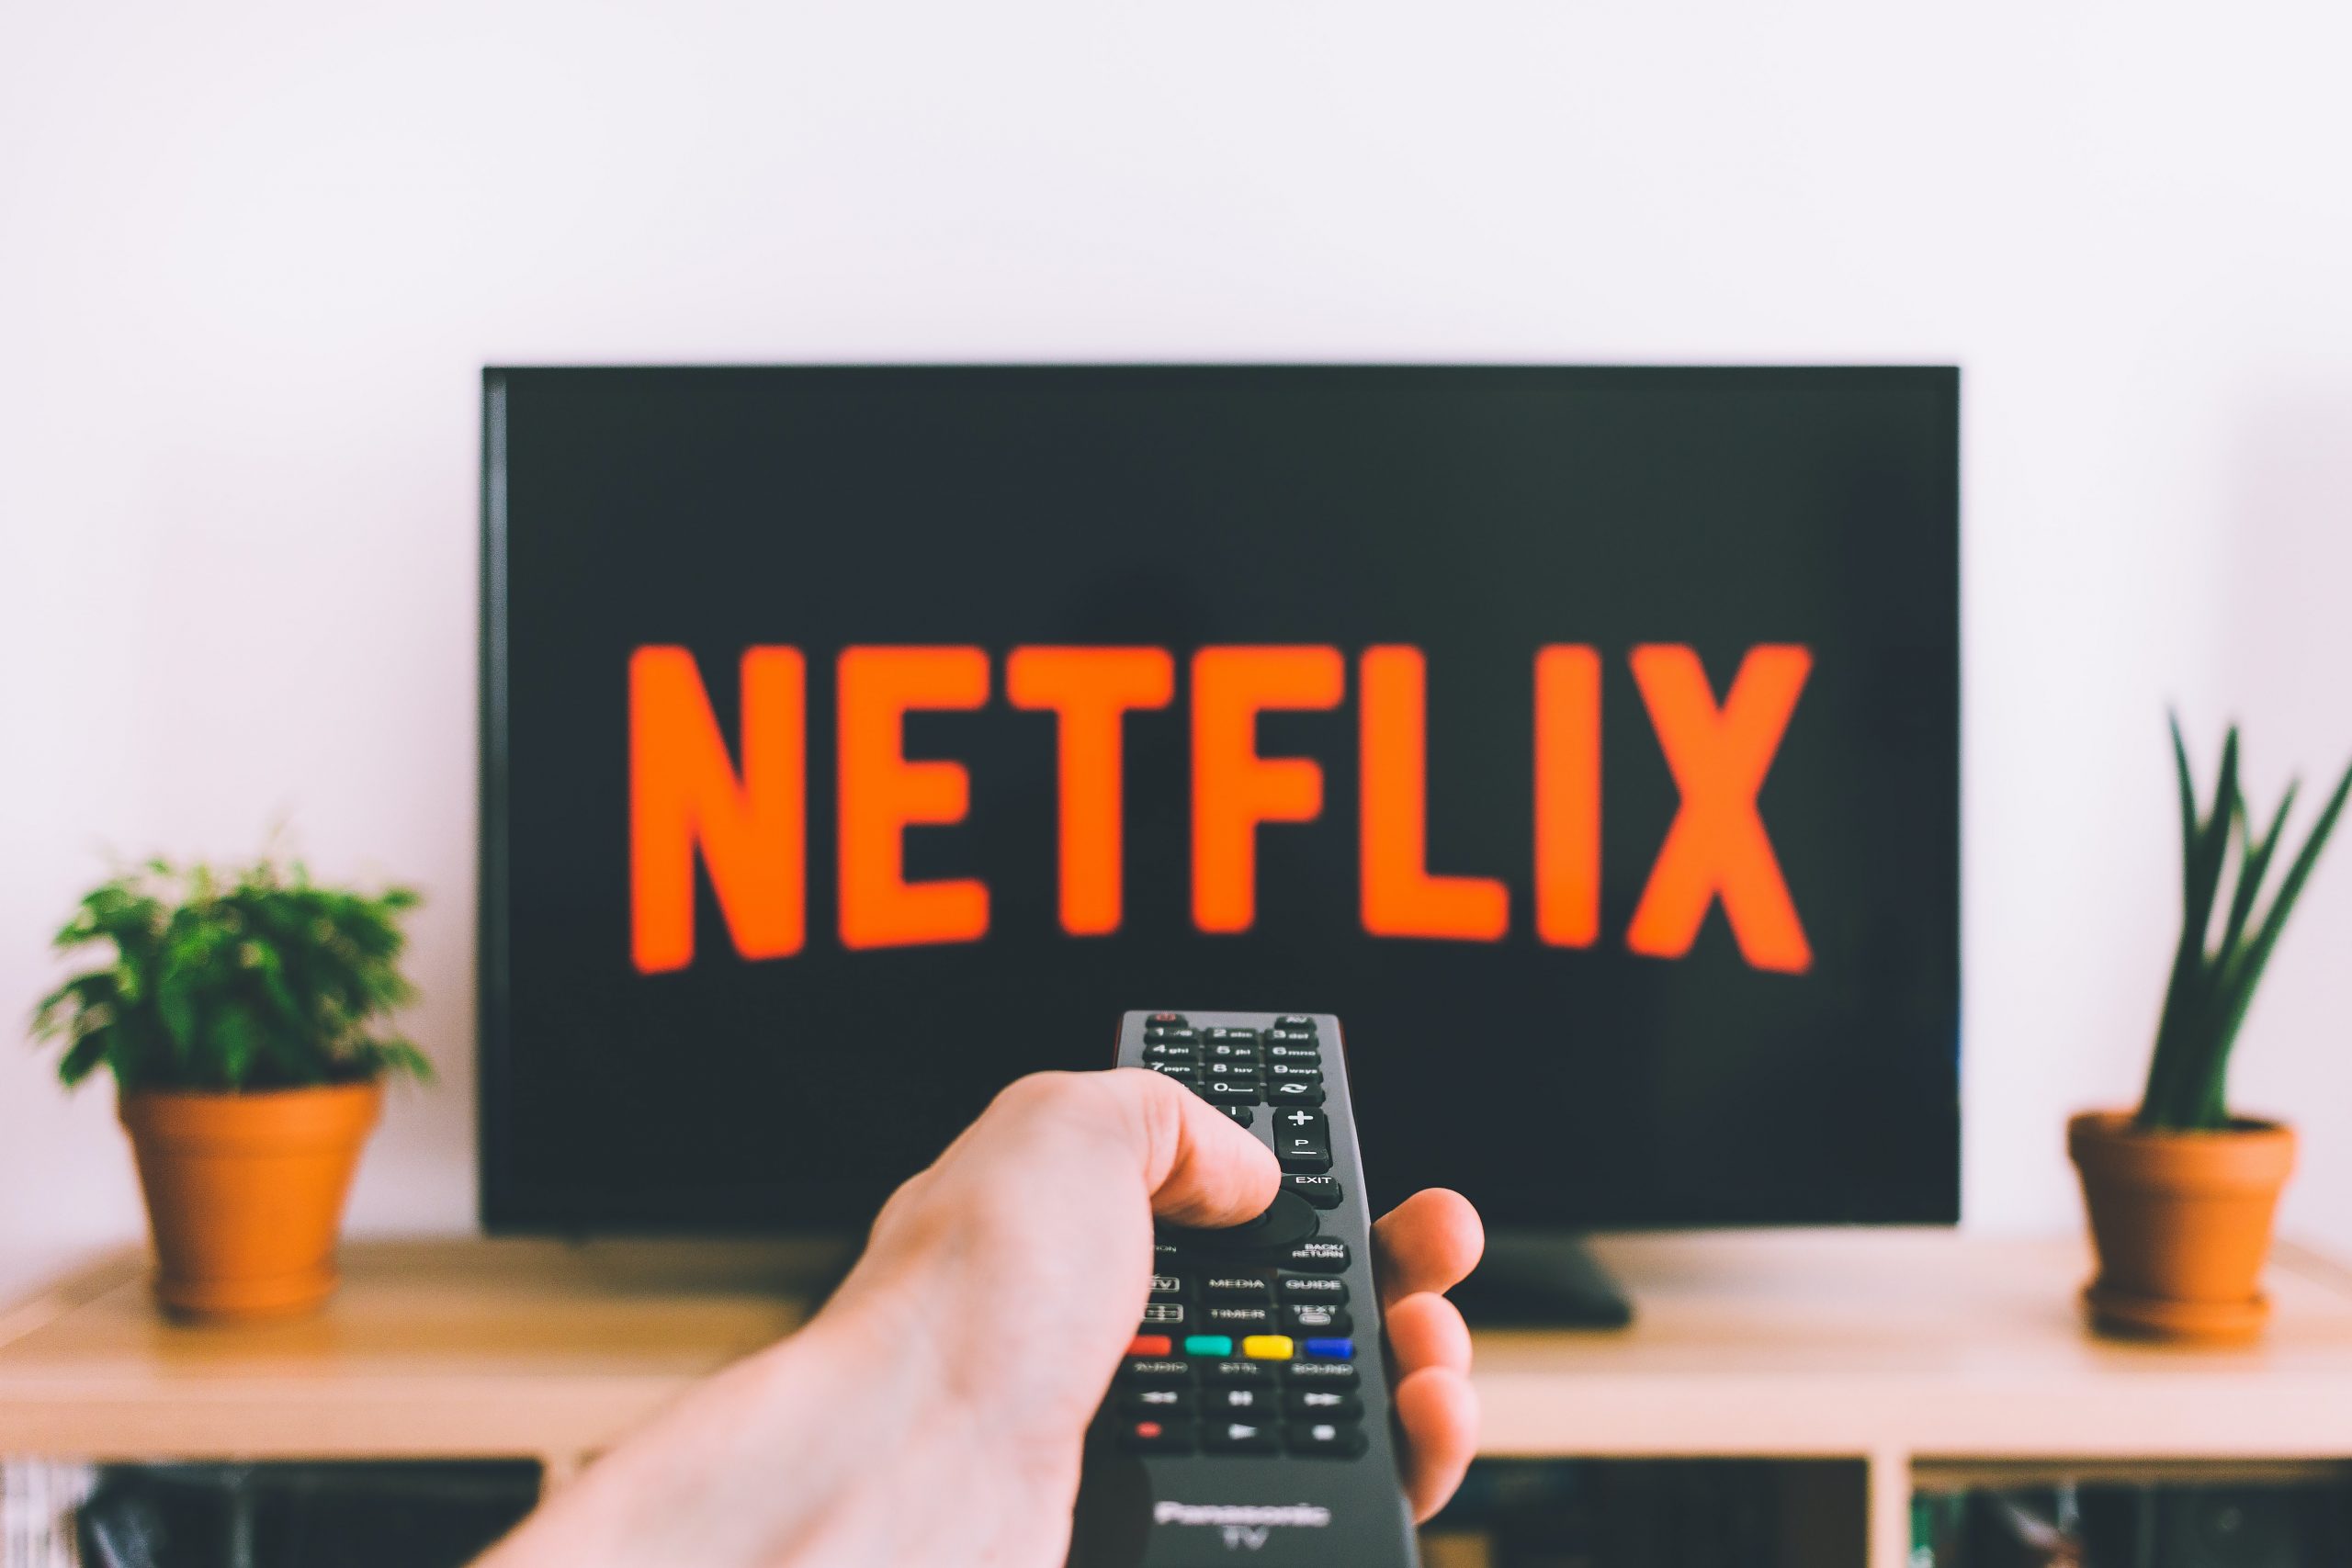 Person pointing remote at a TV that says "Netflix" on the screen